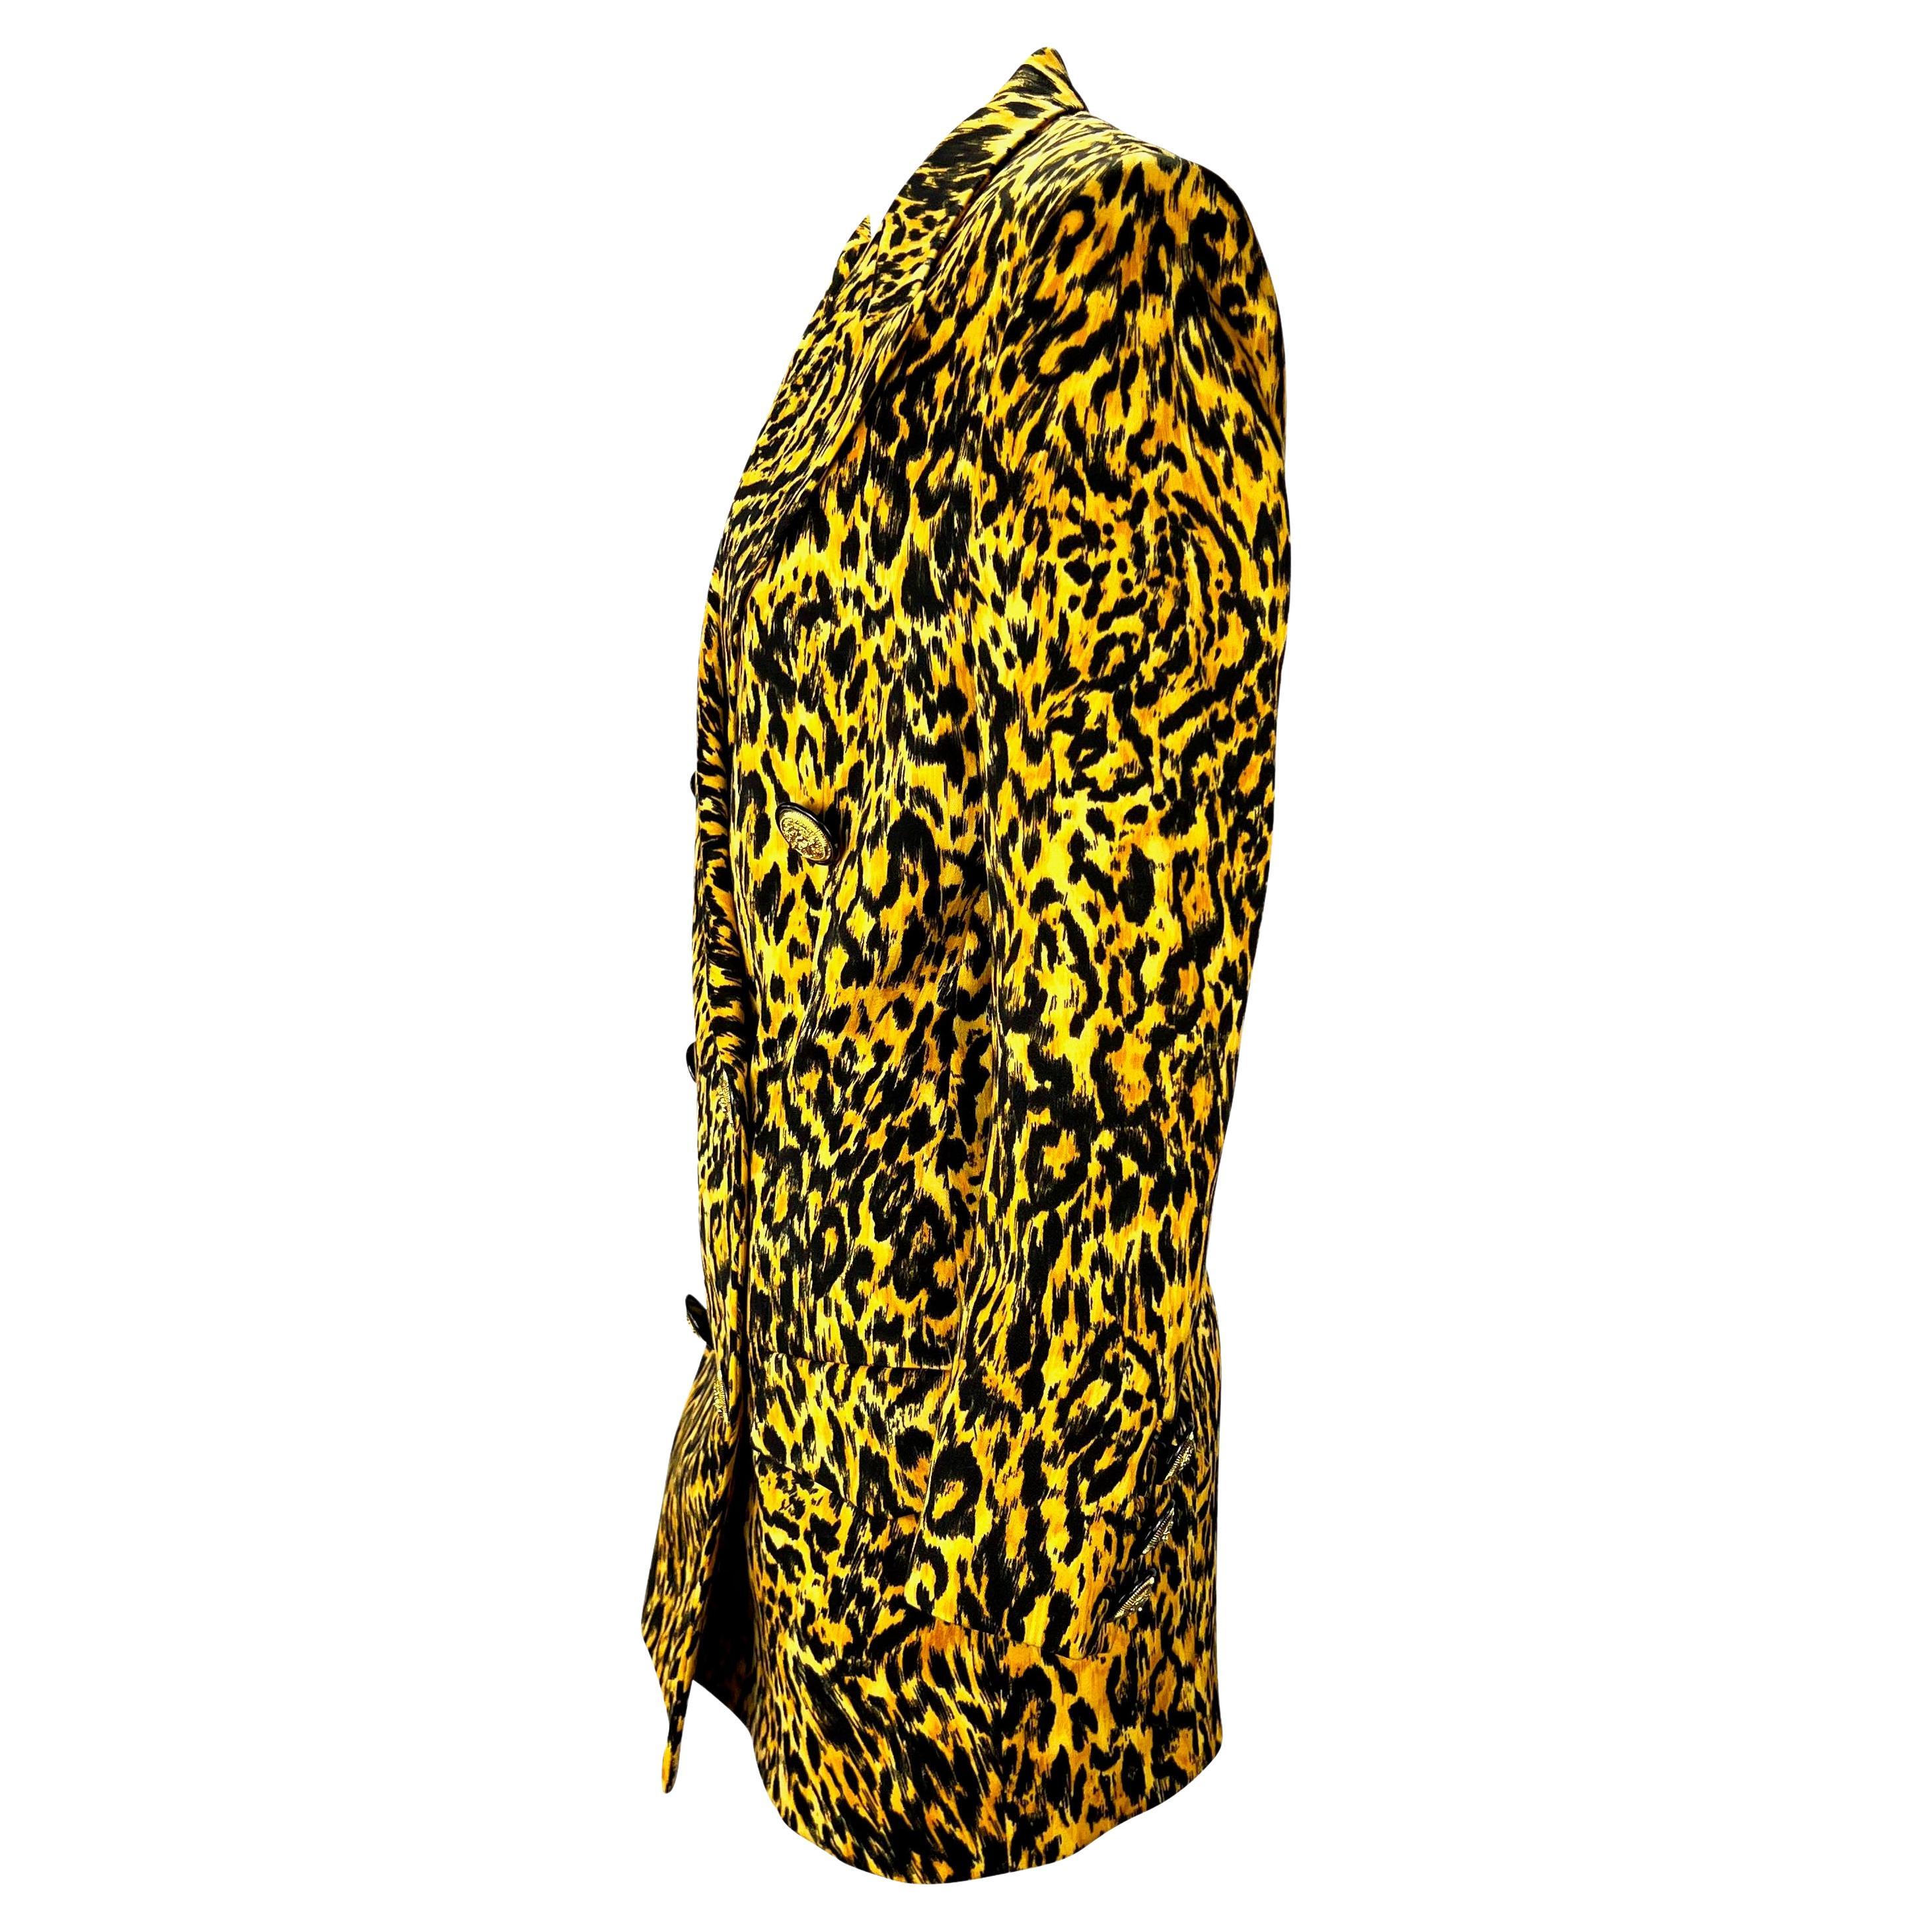 Presenting a cheetah print double-breasted Gianni Versace Couture blazer, designed by Gianni Versace. From the Fall/Winter 1992 collection, this fabulous blazer features gold Roman-inspired coin buttons at the front closure and cuffs, a long body,